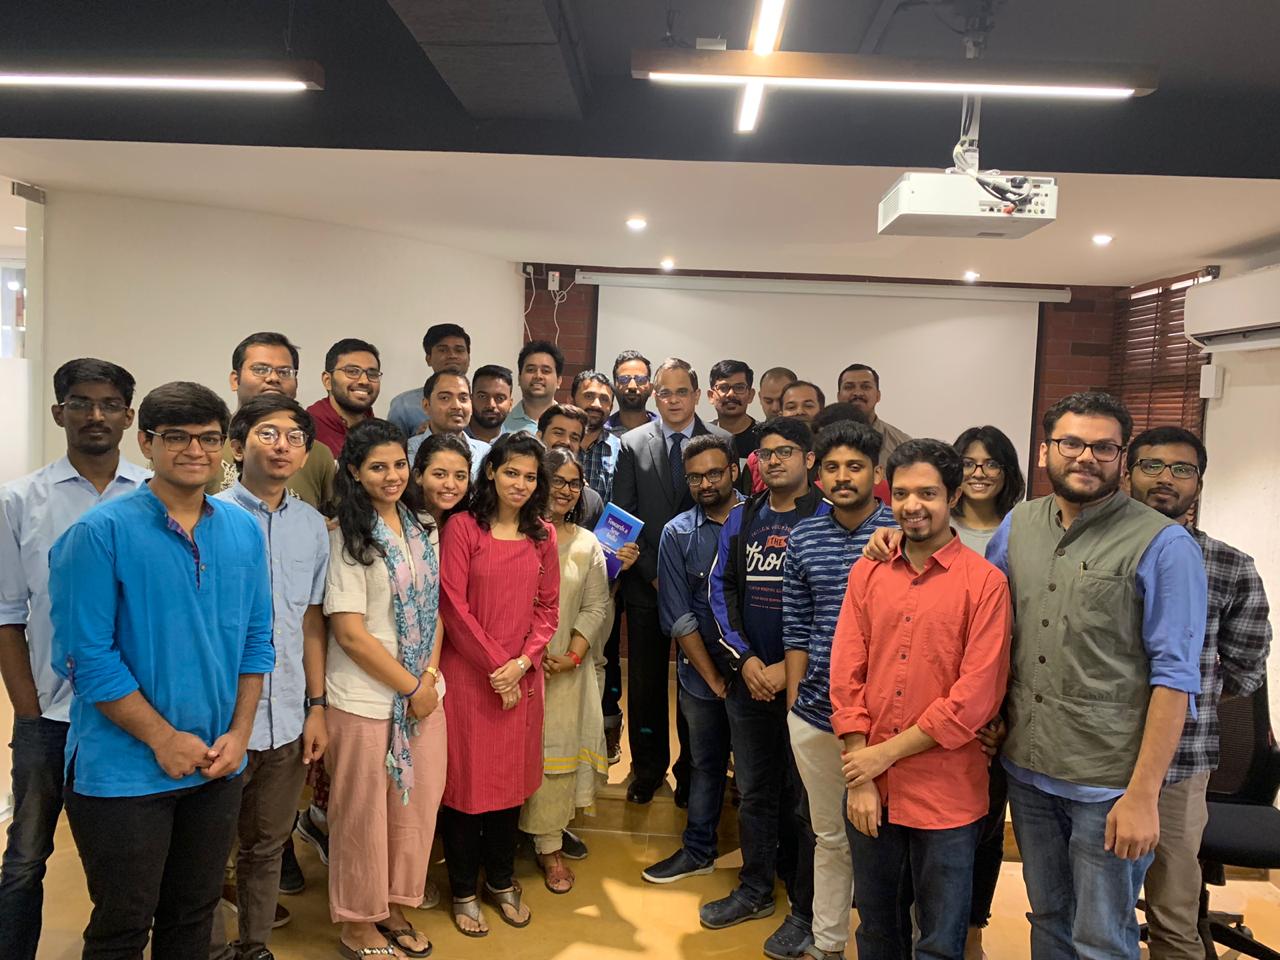 Ethics and Accountability in Governance- A workshop by V. Srinivas, IAS, organized by the Indian School of Public Policy (ISPP) in the capital city